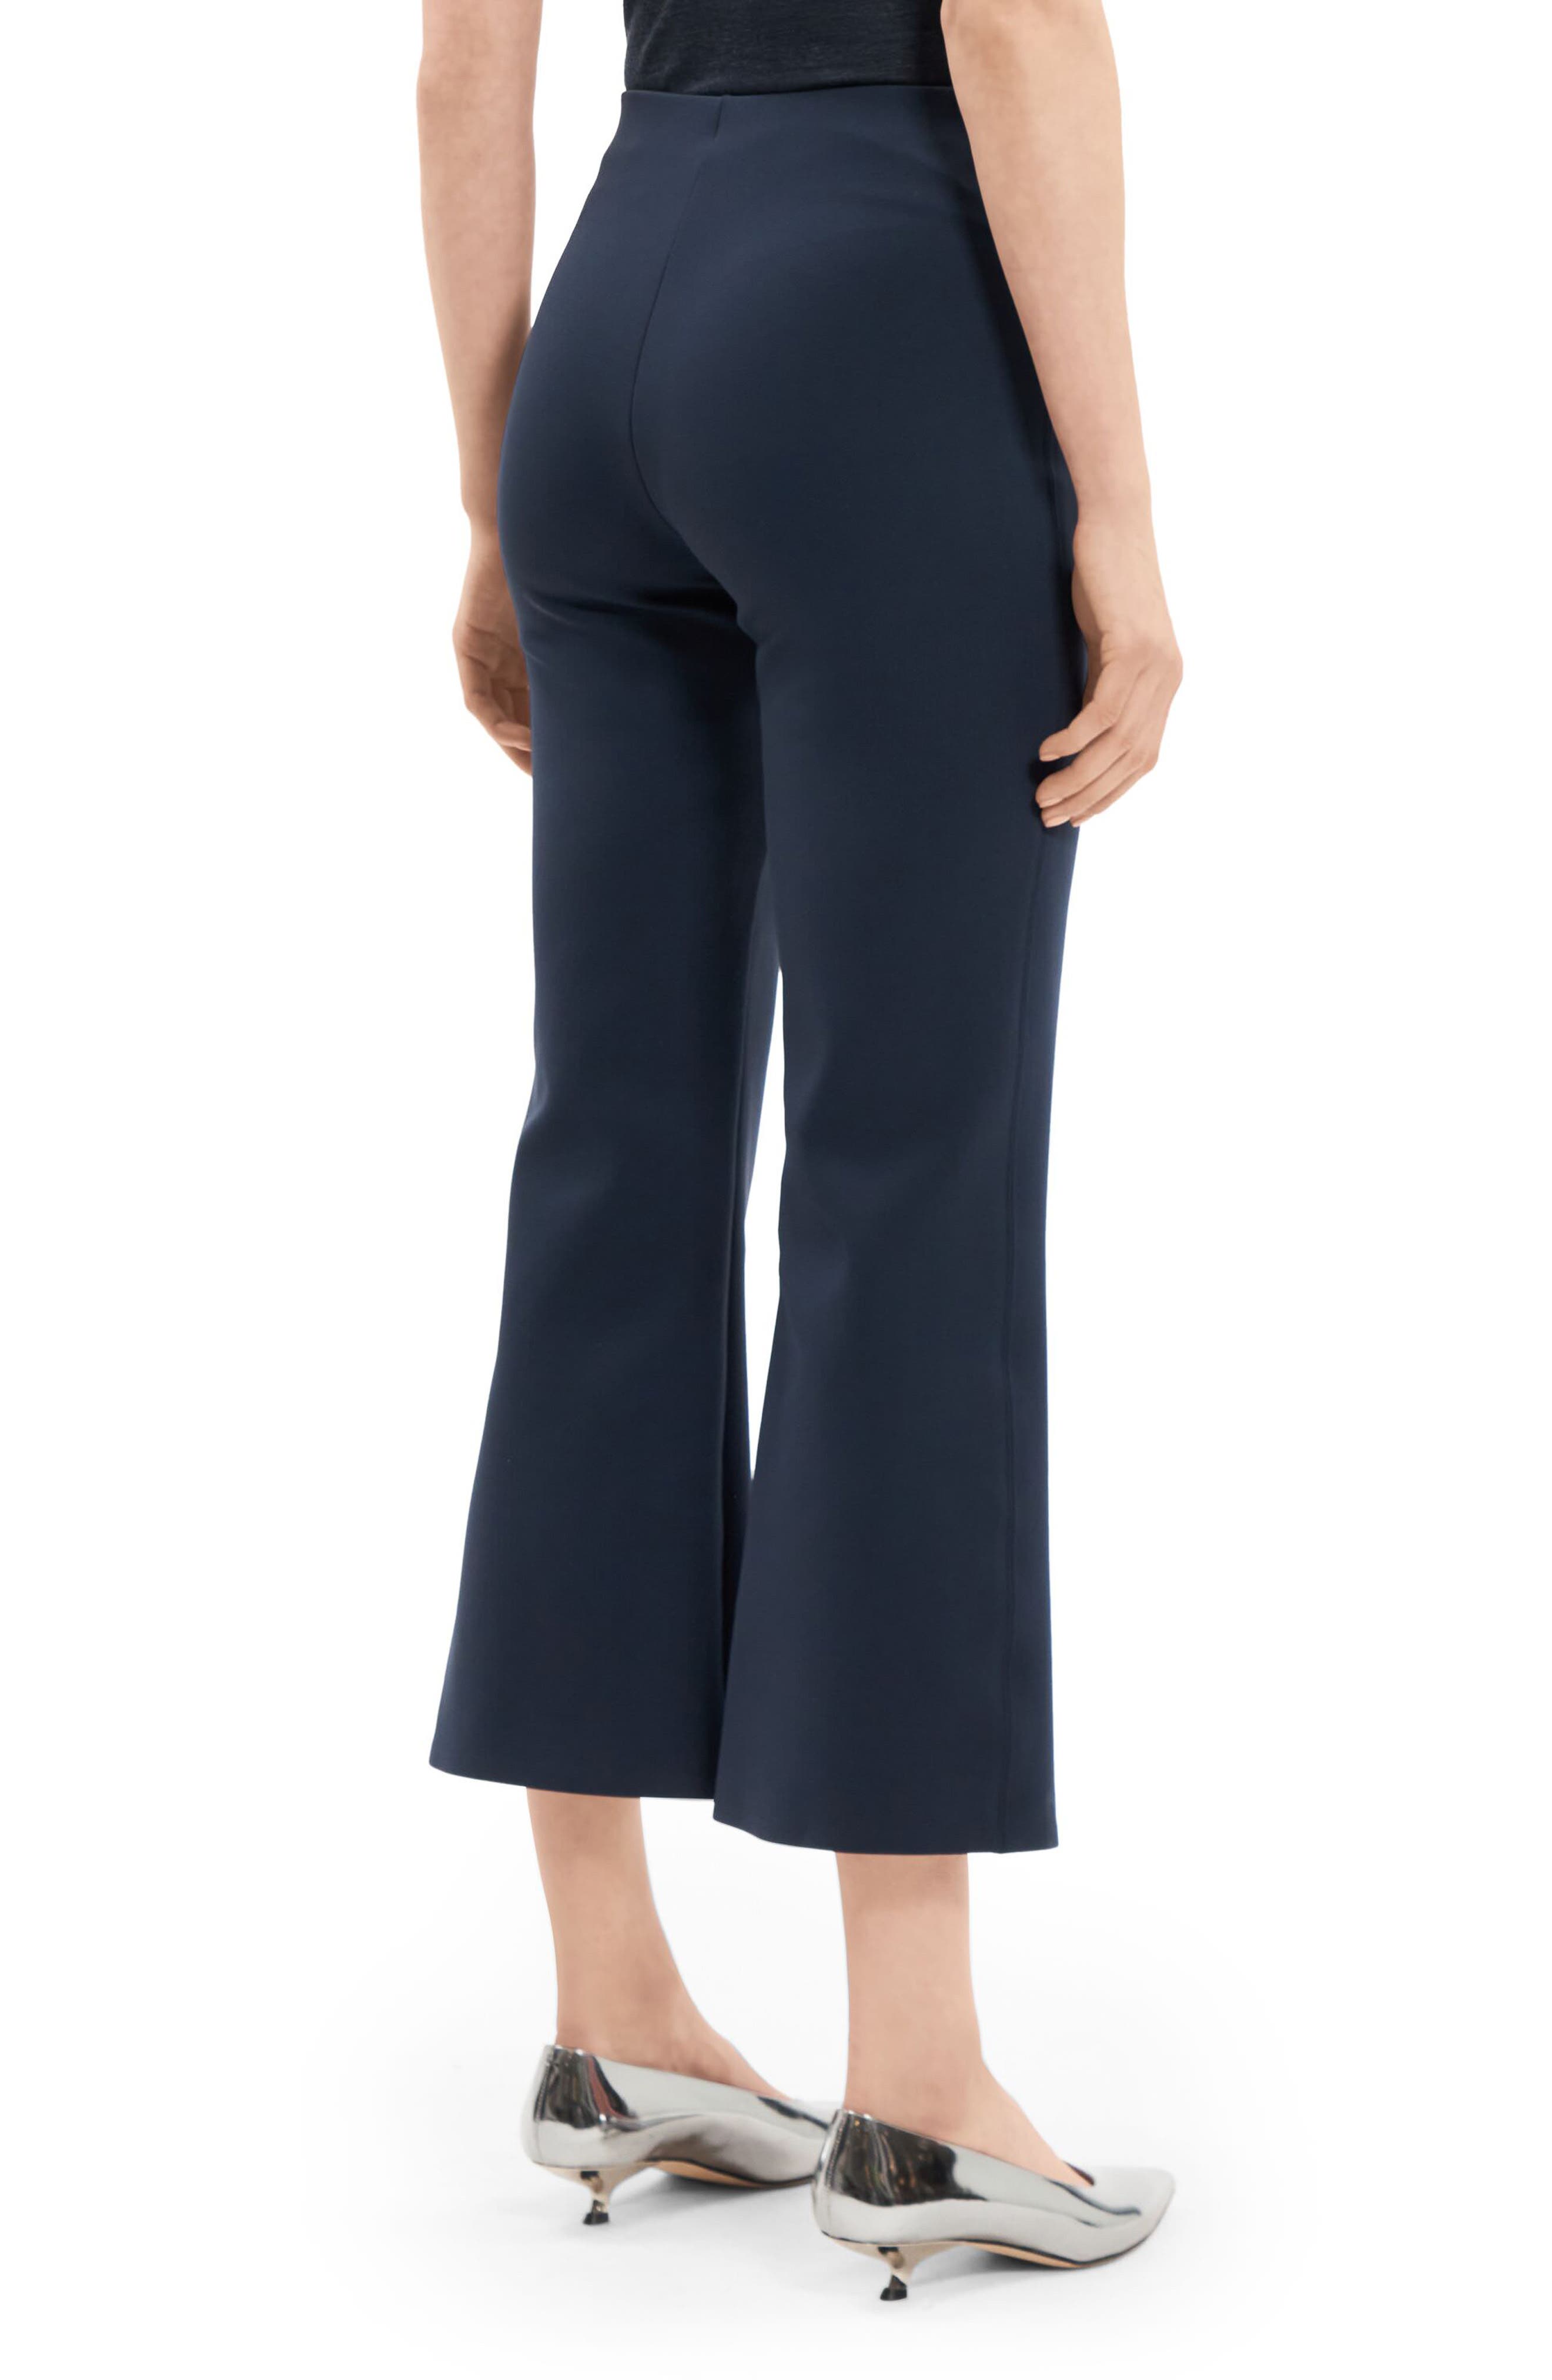 Theory Core Kick Flare Crop Pants in Nocturne Navy